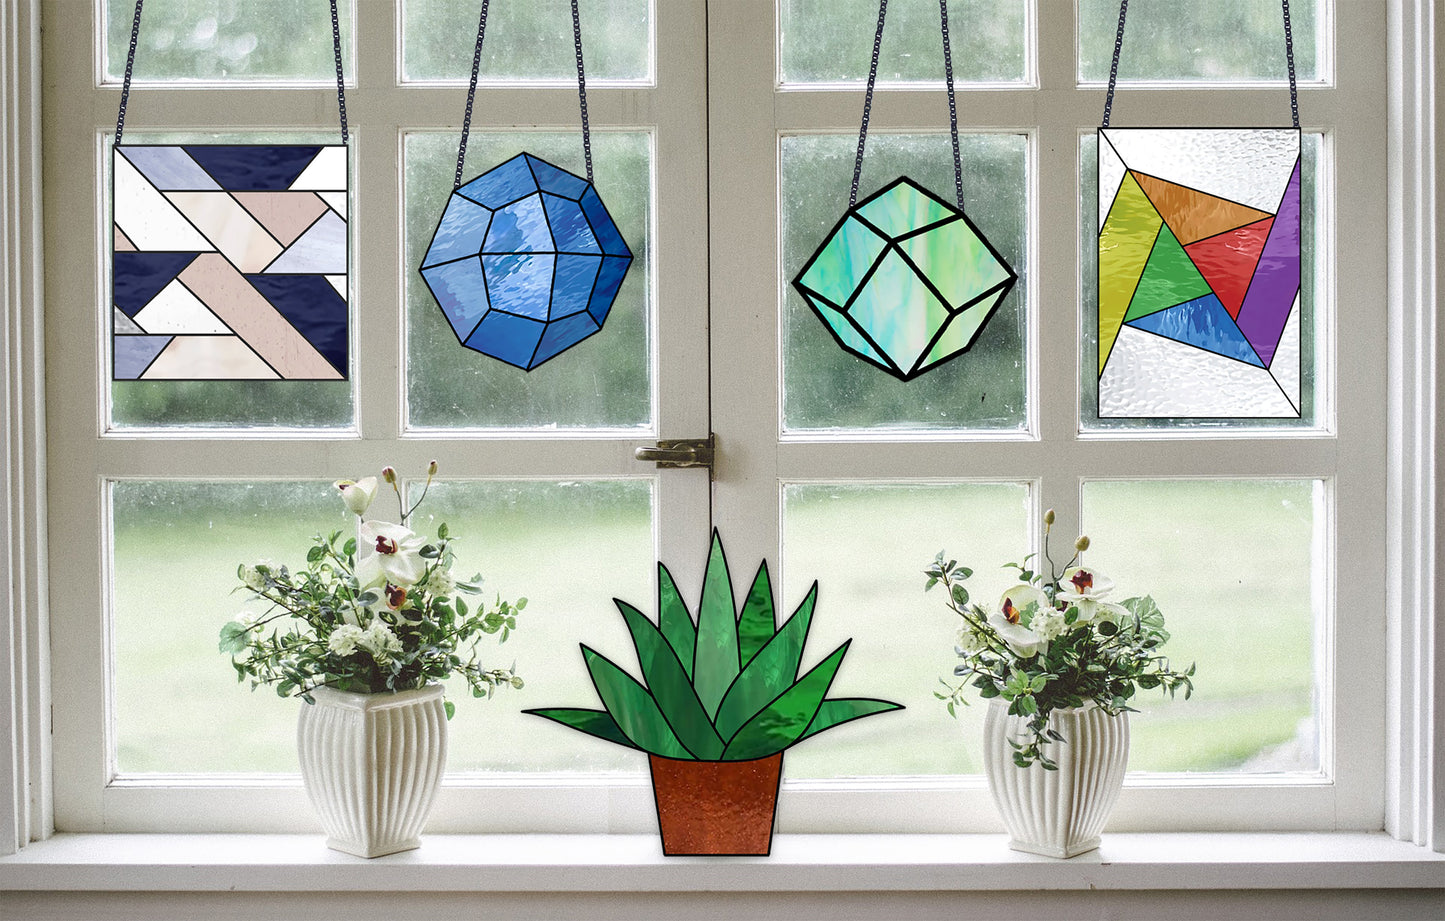 Geometric stained glass patterns from the beginner mega pack shown in a white windowsill with plants